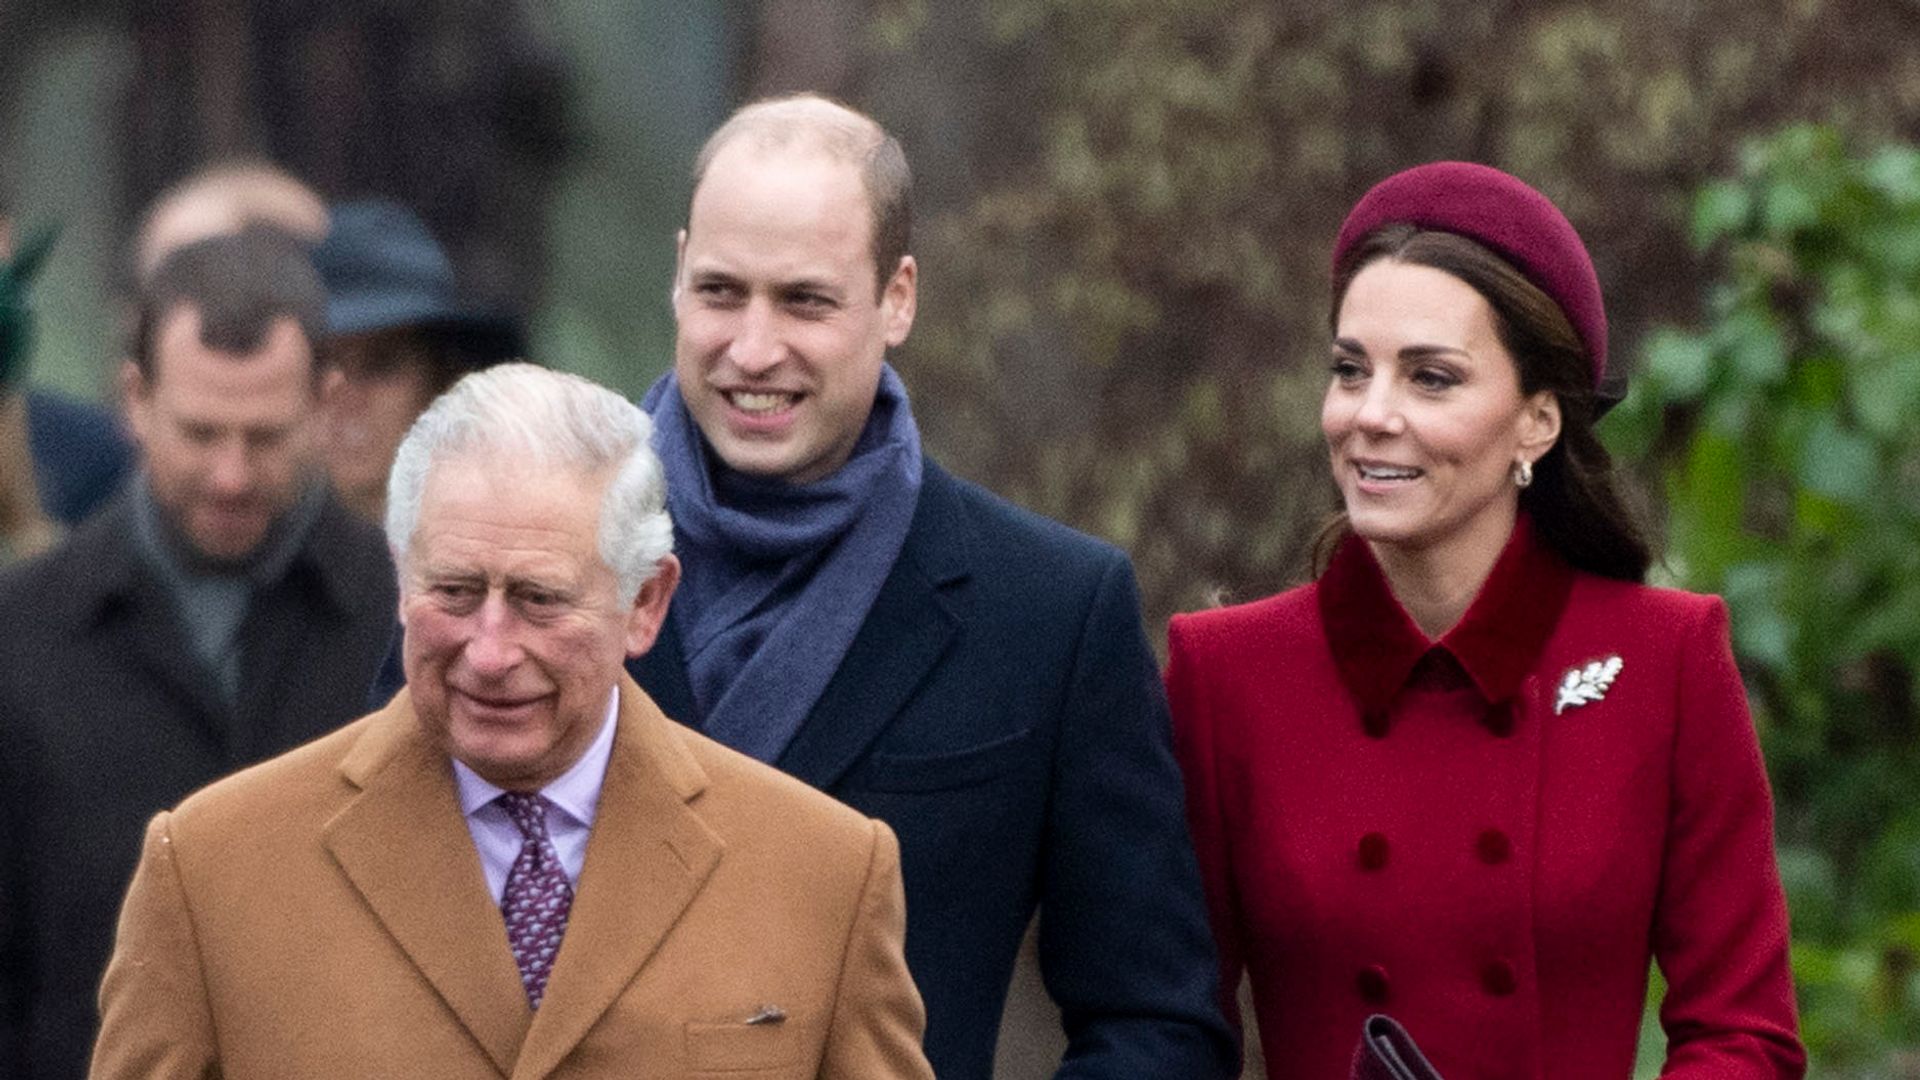 King Charles walking with Prince William and Kate Middleton